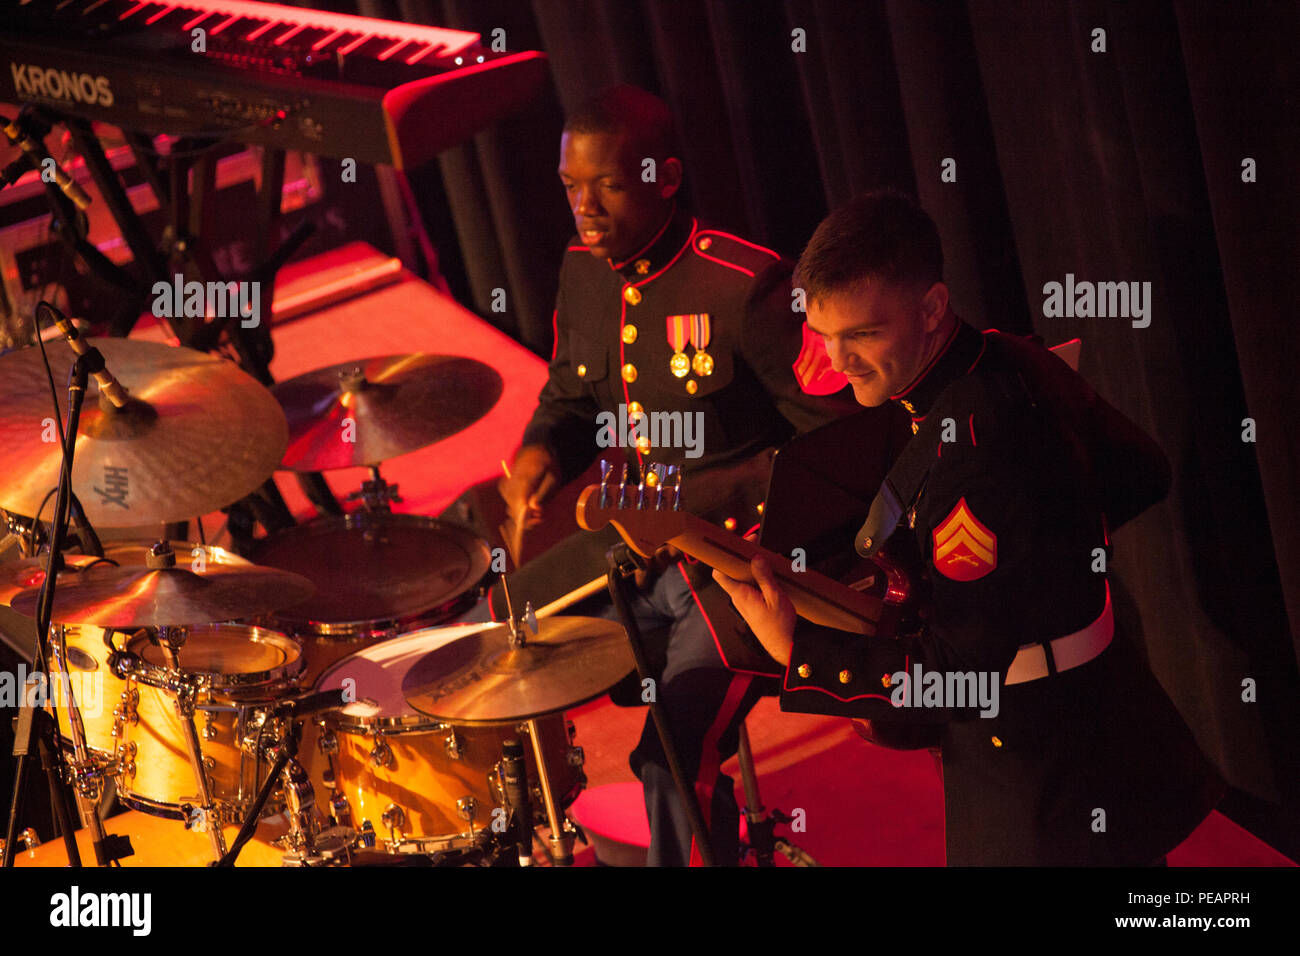 U.S. Marines Cpl. Randy West (Left), Percussionist, and Cpl. Scott Wente (right), Electric Guitarist, with Marine Corps Band New Orleans performs for the celebration of the 240th Marine Corps Birthday Ball at Mardi Gras World, New Orleans, La., Nov. 21, 2015. This year’s celebration honors those past, present, and future Marines throughout history and marks the 240th Marine Corps Birthday since its founding on Nov. 10, 1775. (U.S. Marine Corps photo by Kimberly Aguirre/Released) Stock Photo